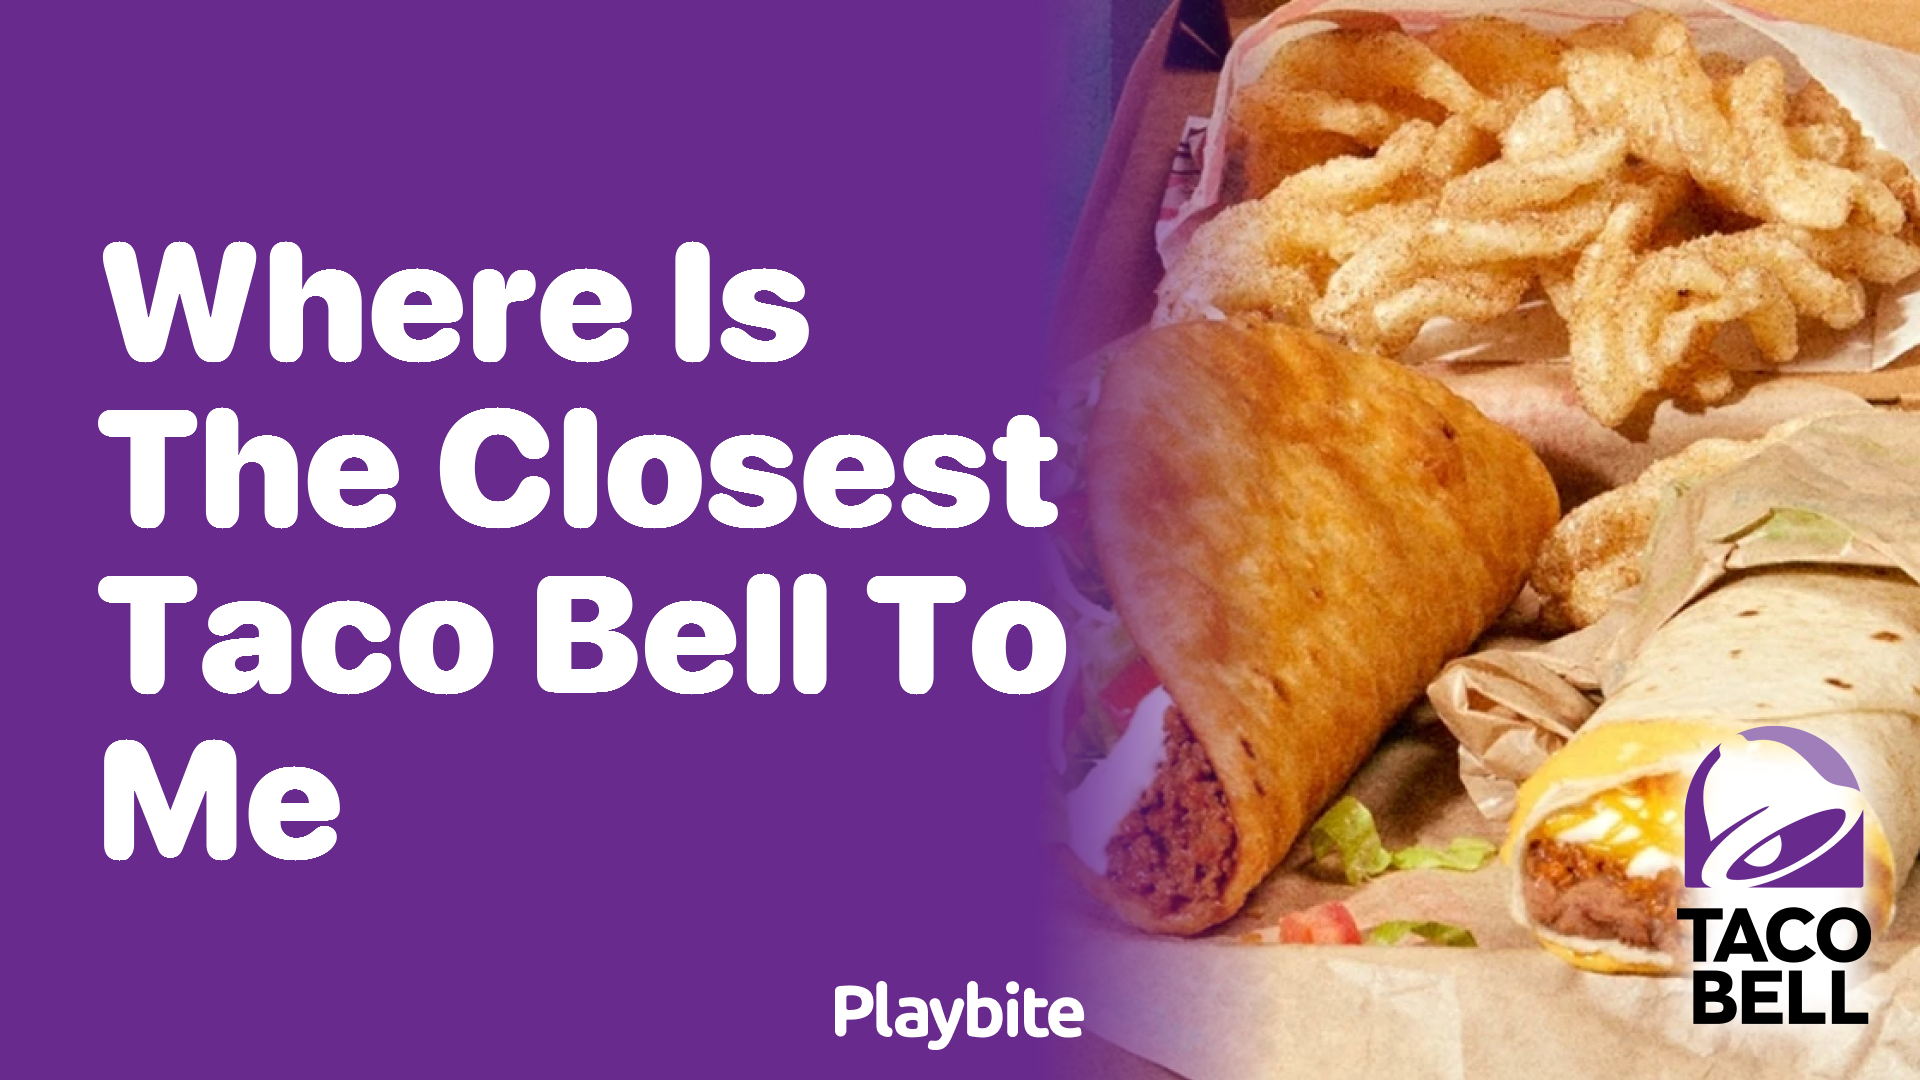 Where is the closest Taco Bell to Me?